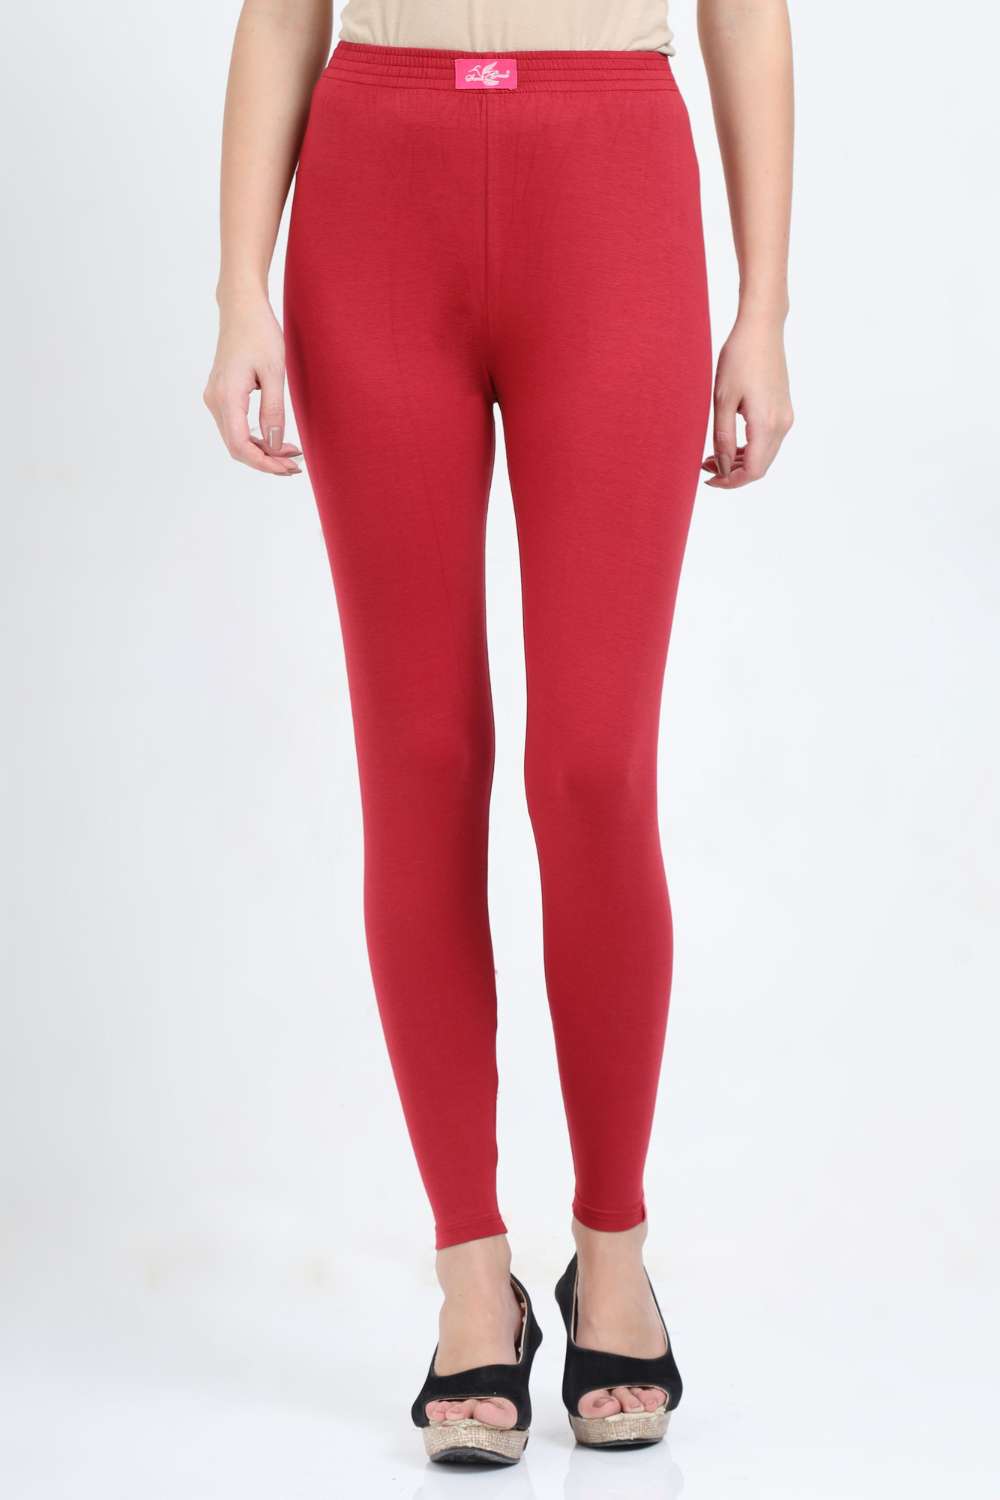 Be In Shape - Legging Made in Turkey Lismina brand Dry-fit Lycra material  Available now | Facebook